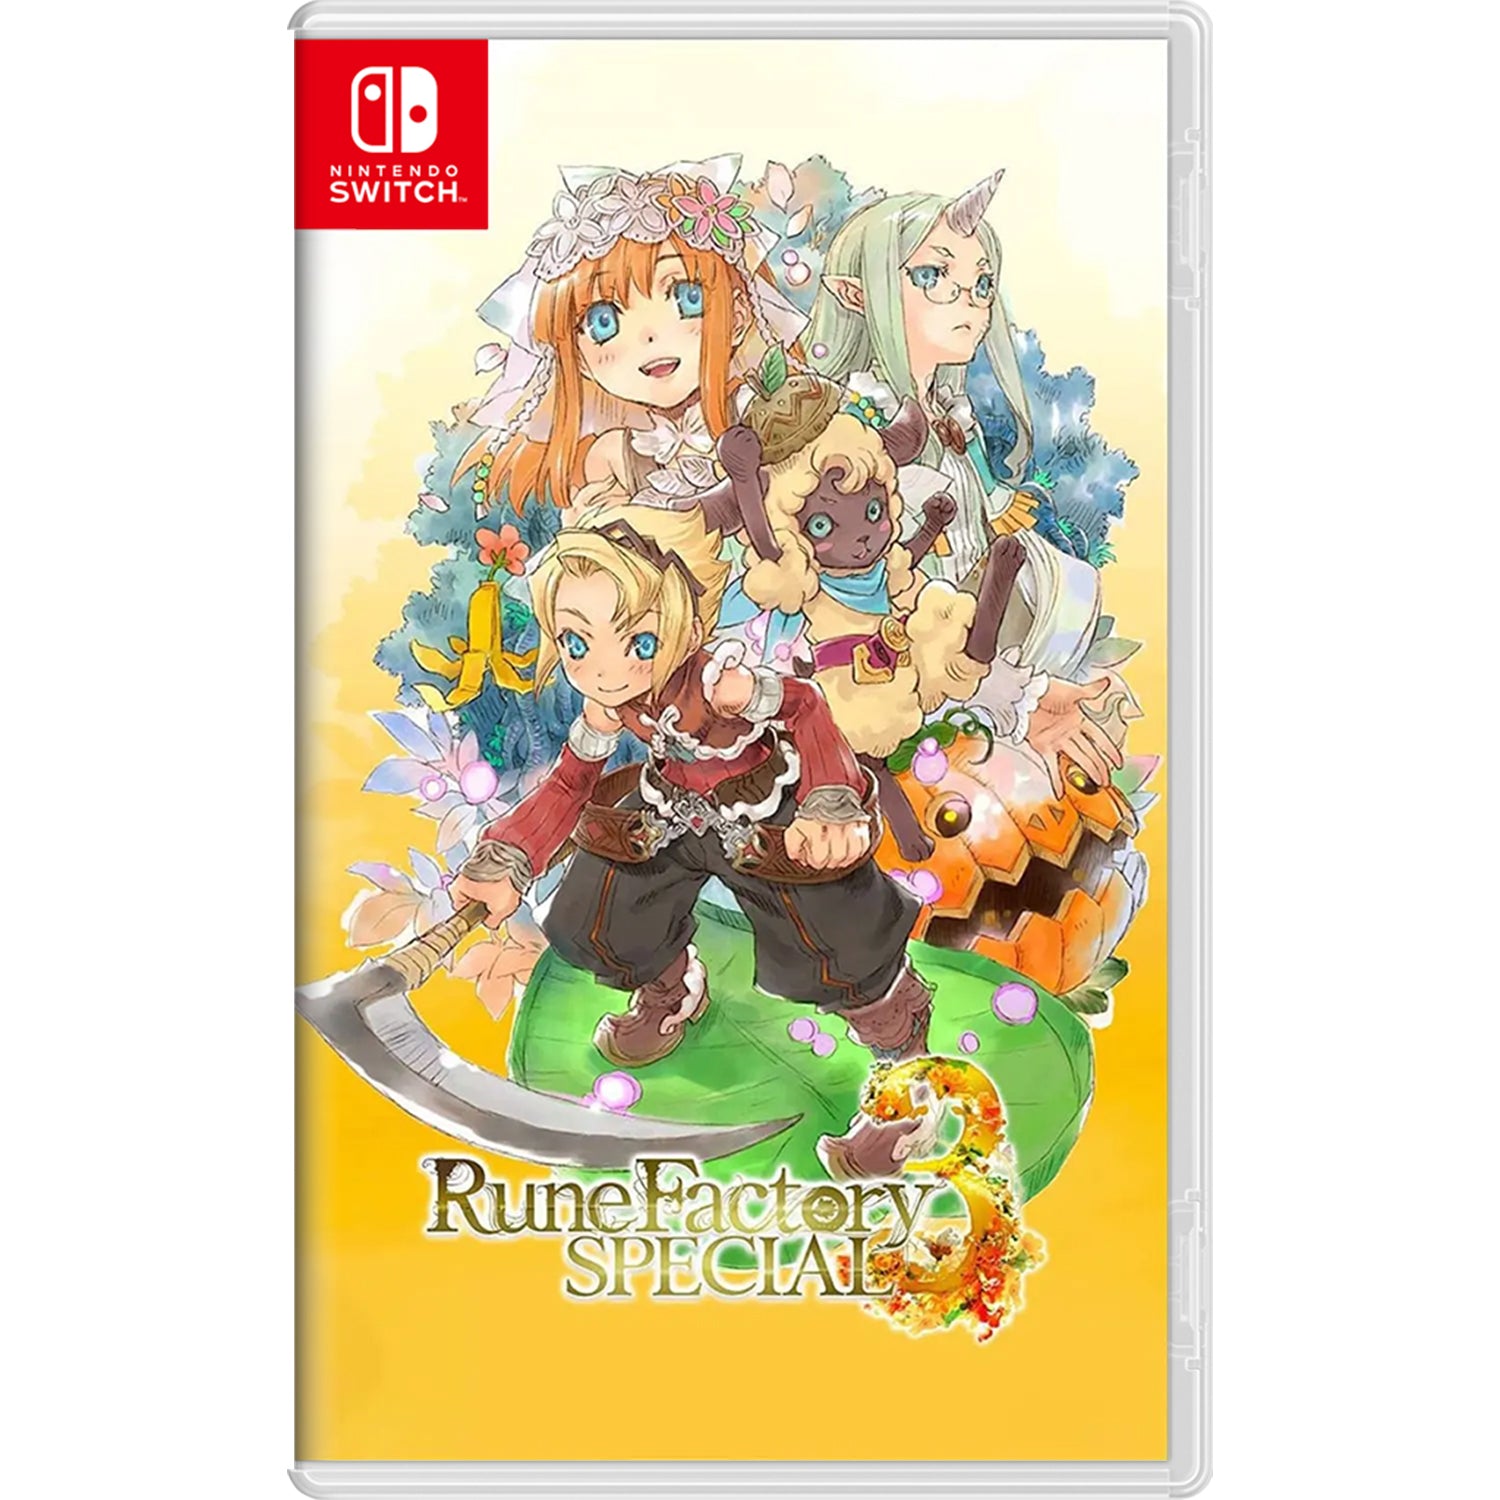 NSW Rune Factory 3 Special (Chinese)